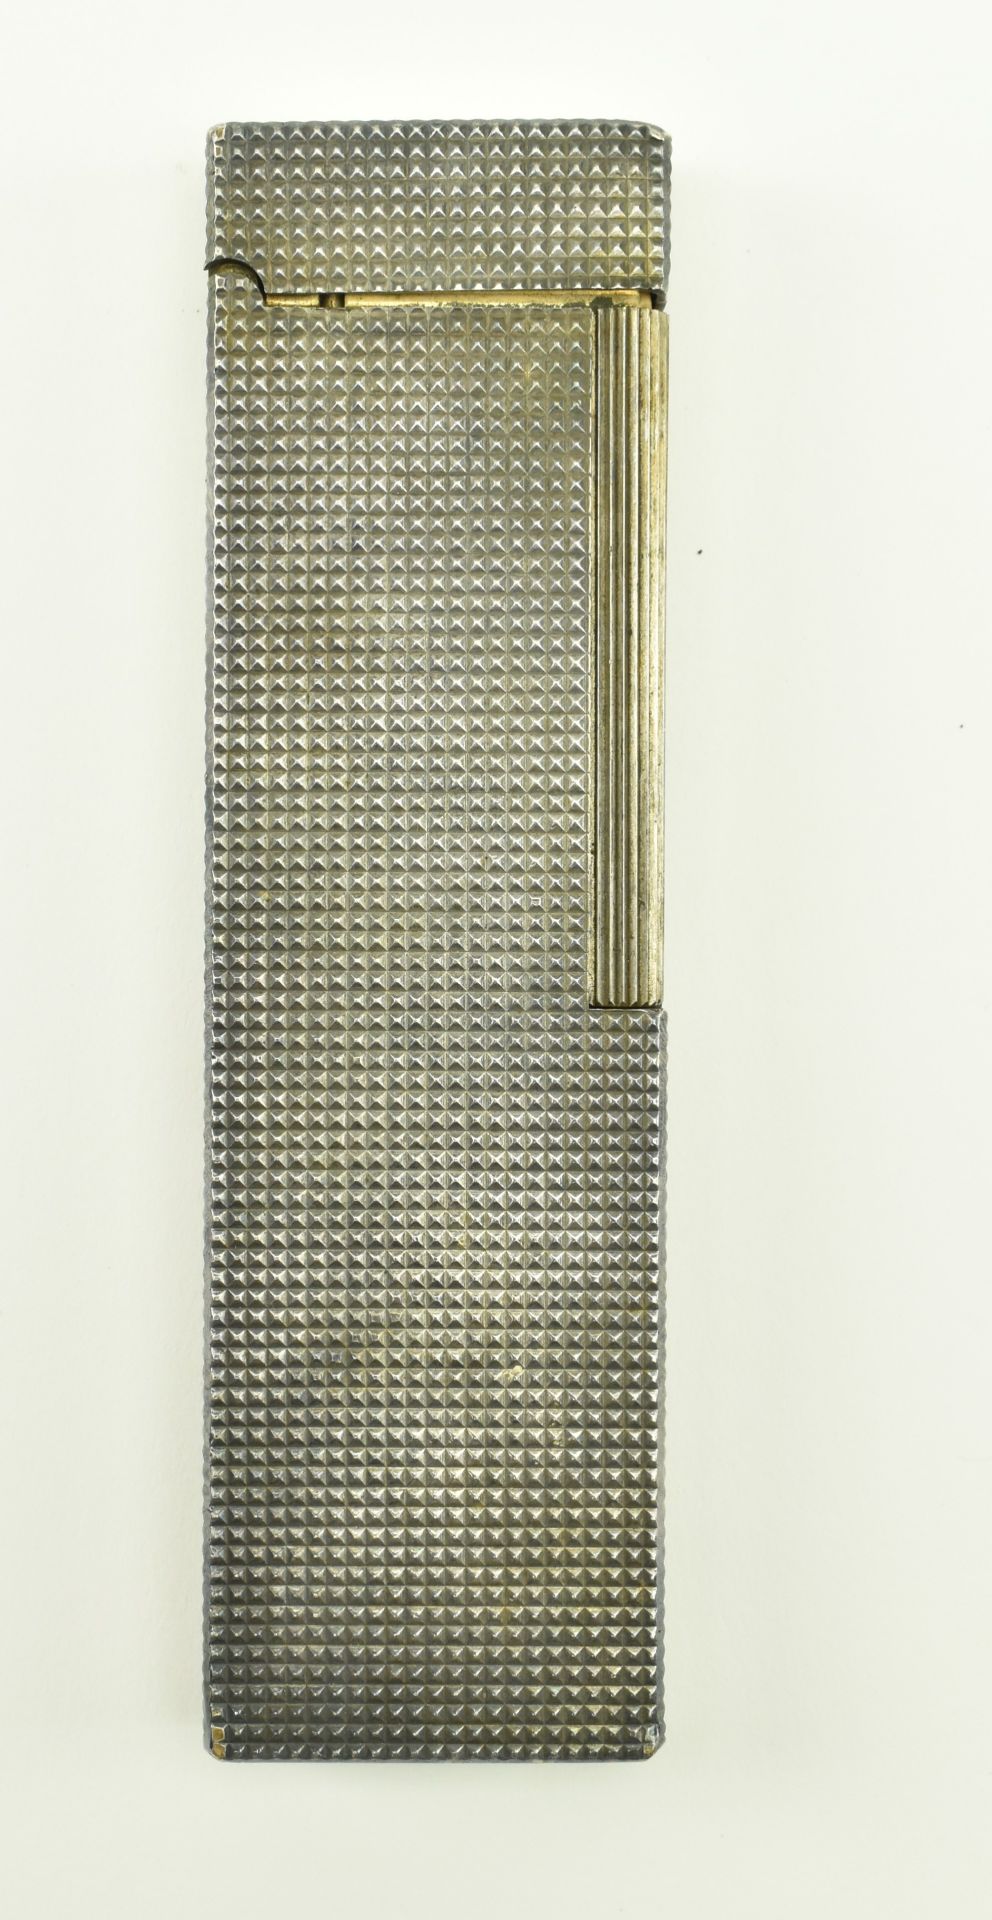 20TH CENTURY DUPONT DIAMOND PATTERN SILVER PLATED LIGHTER